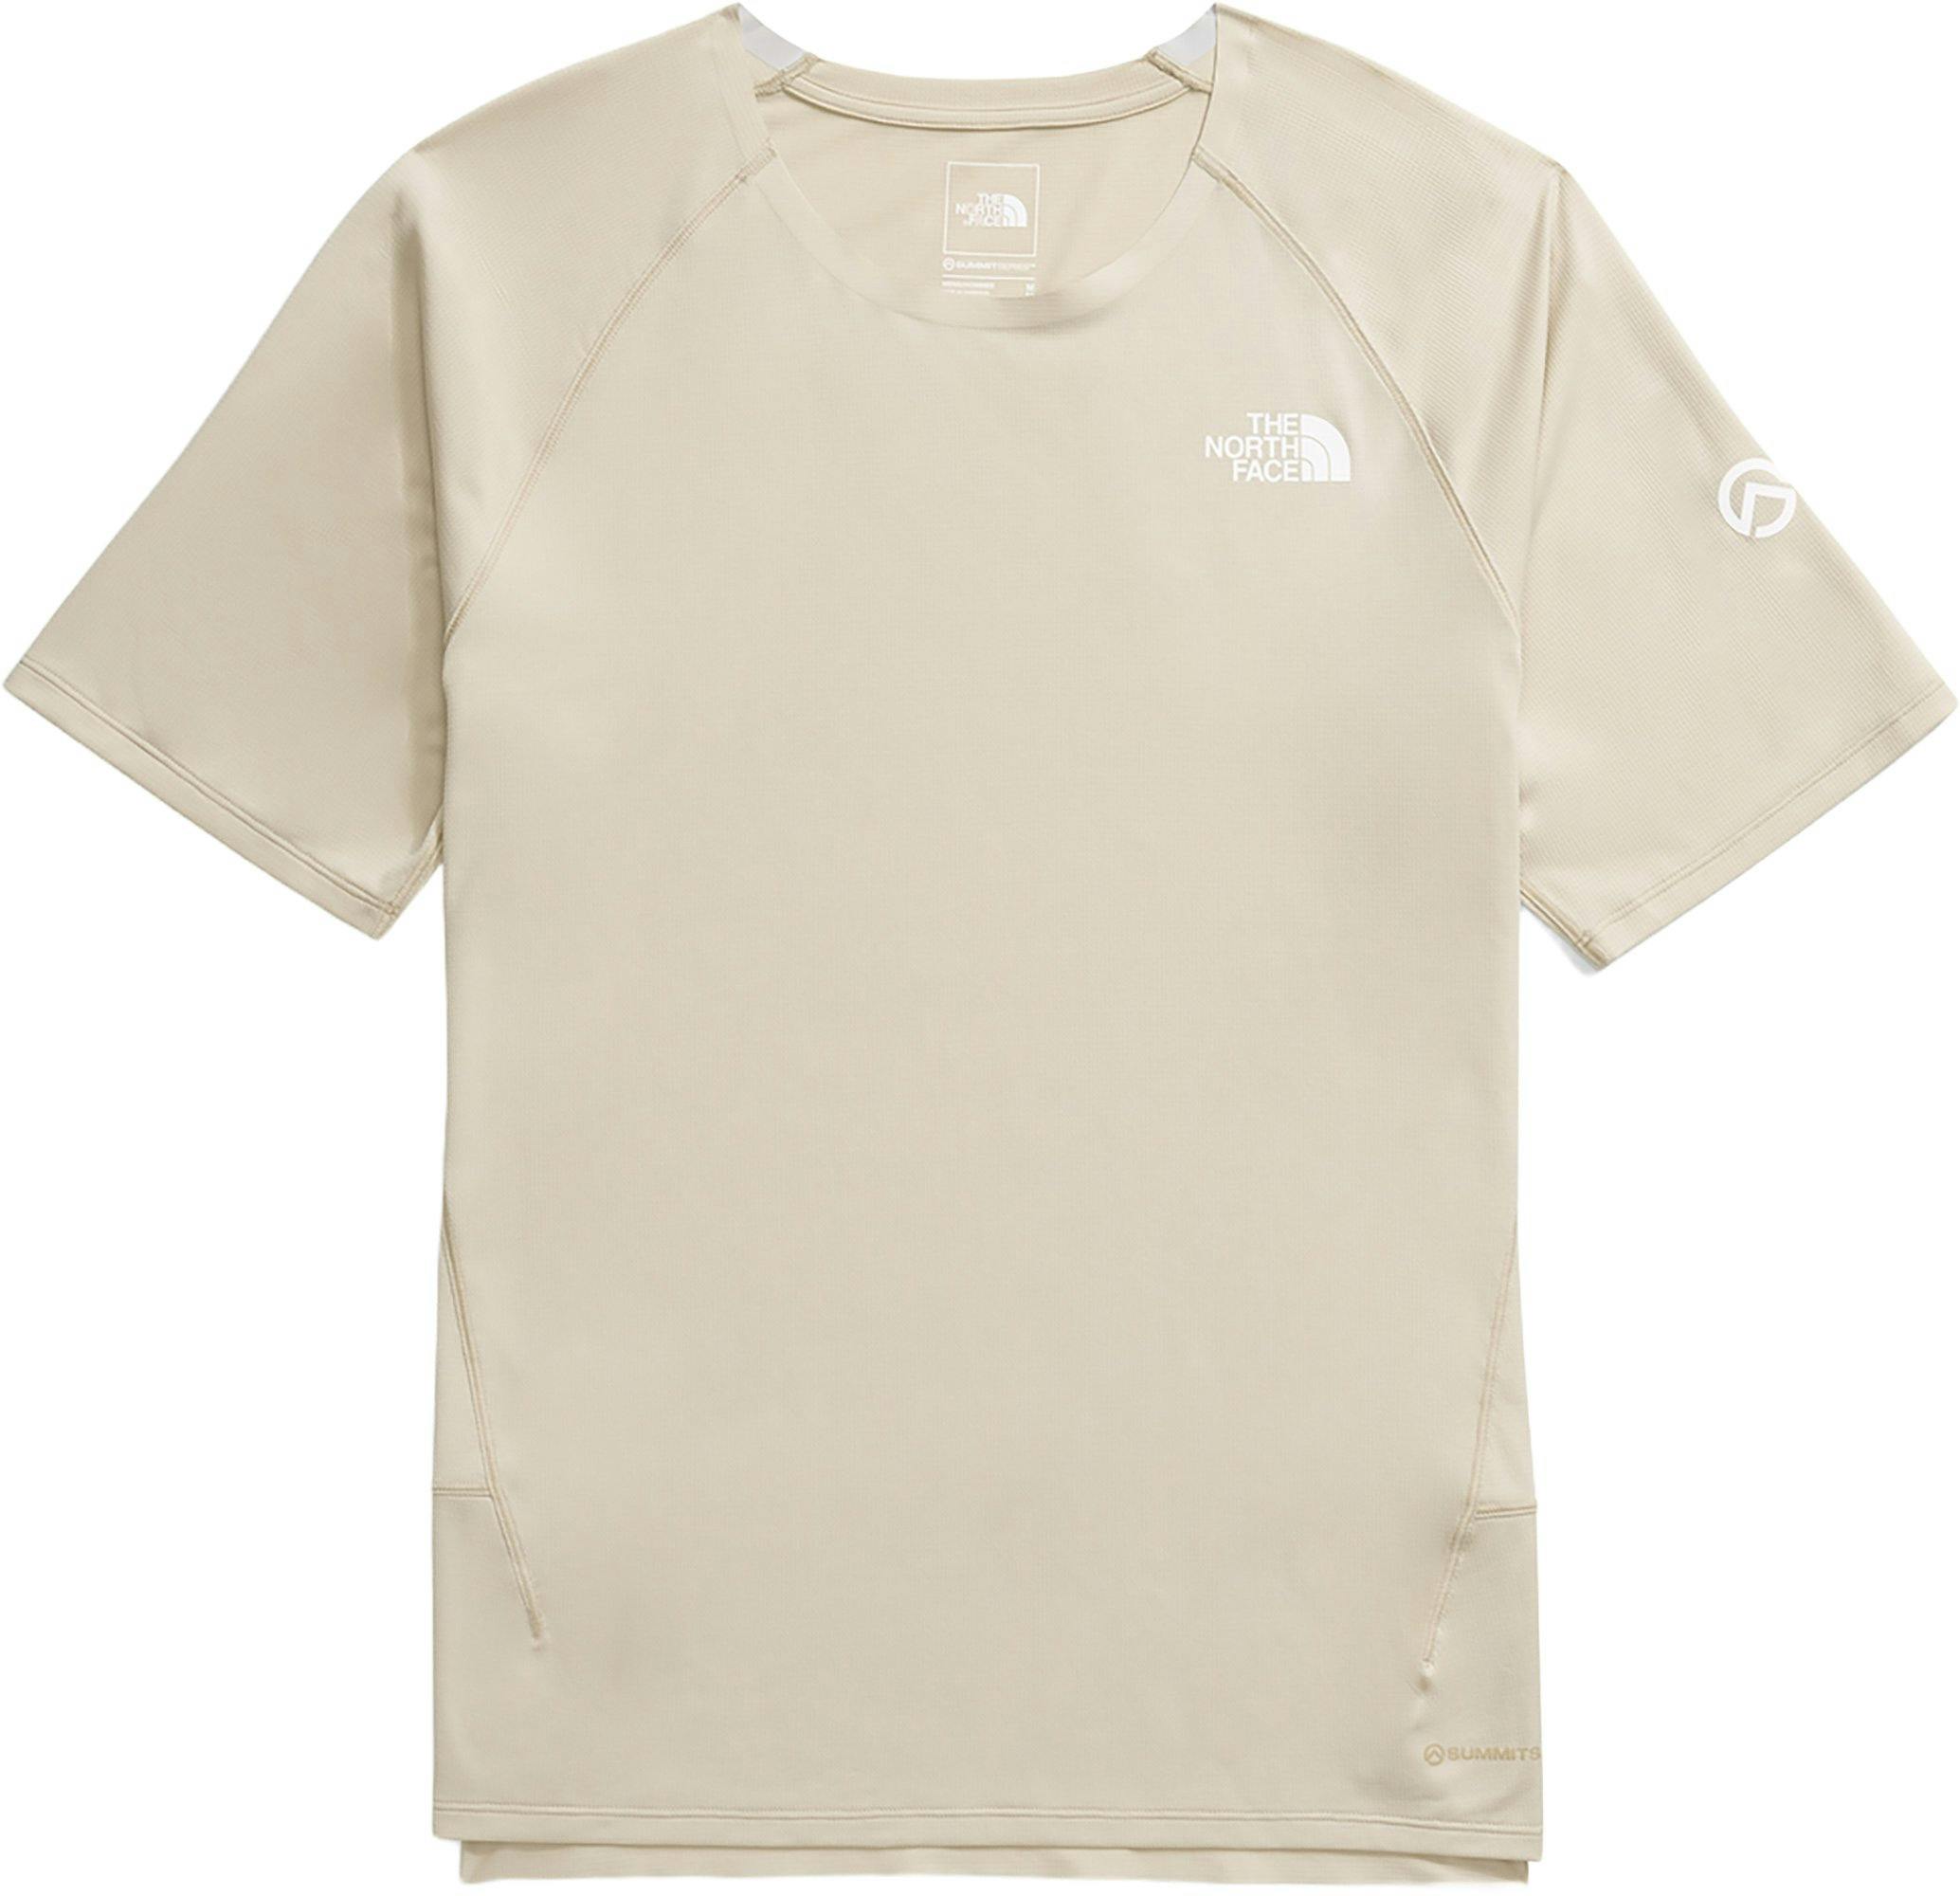 Product image for Summit High Trail Run T-Shirt - Men's